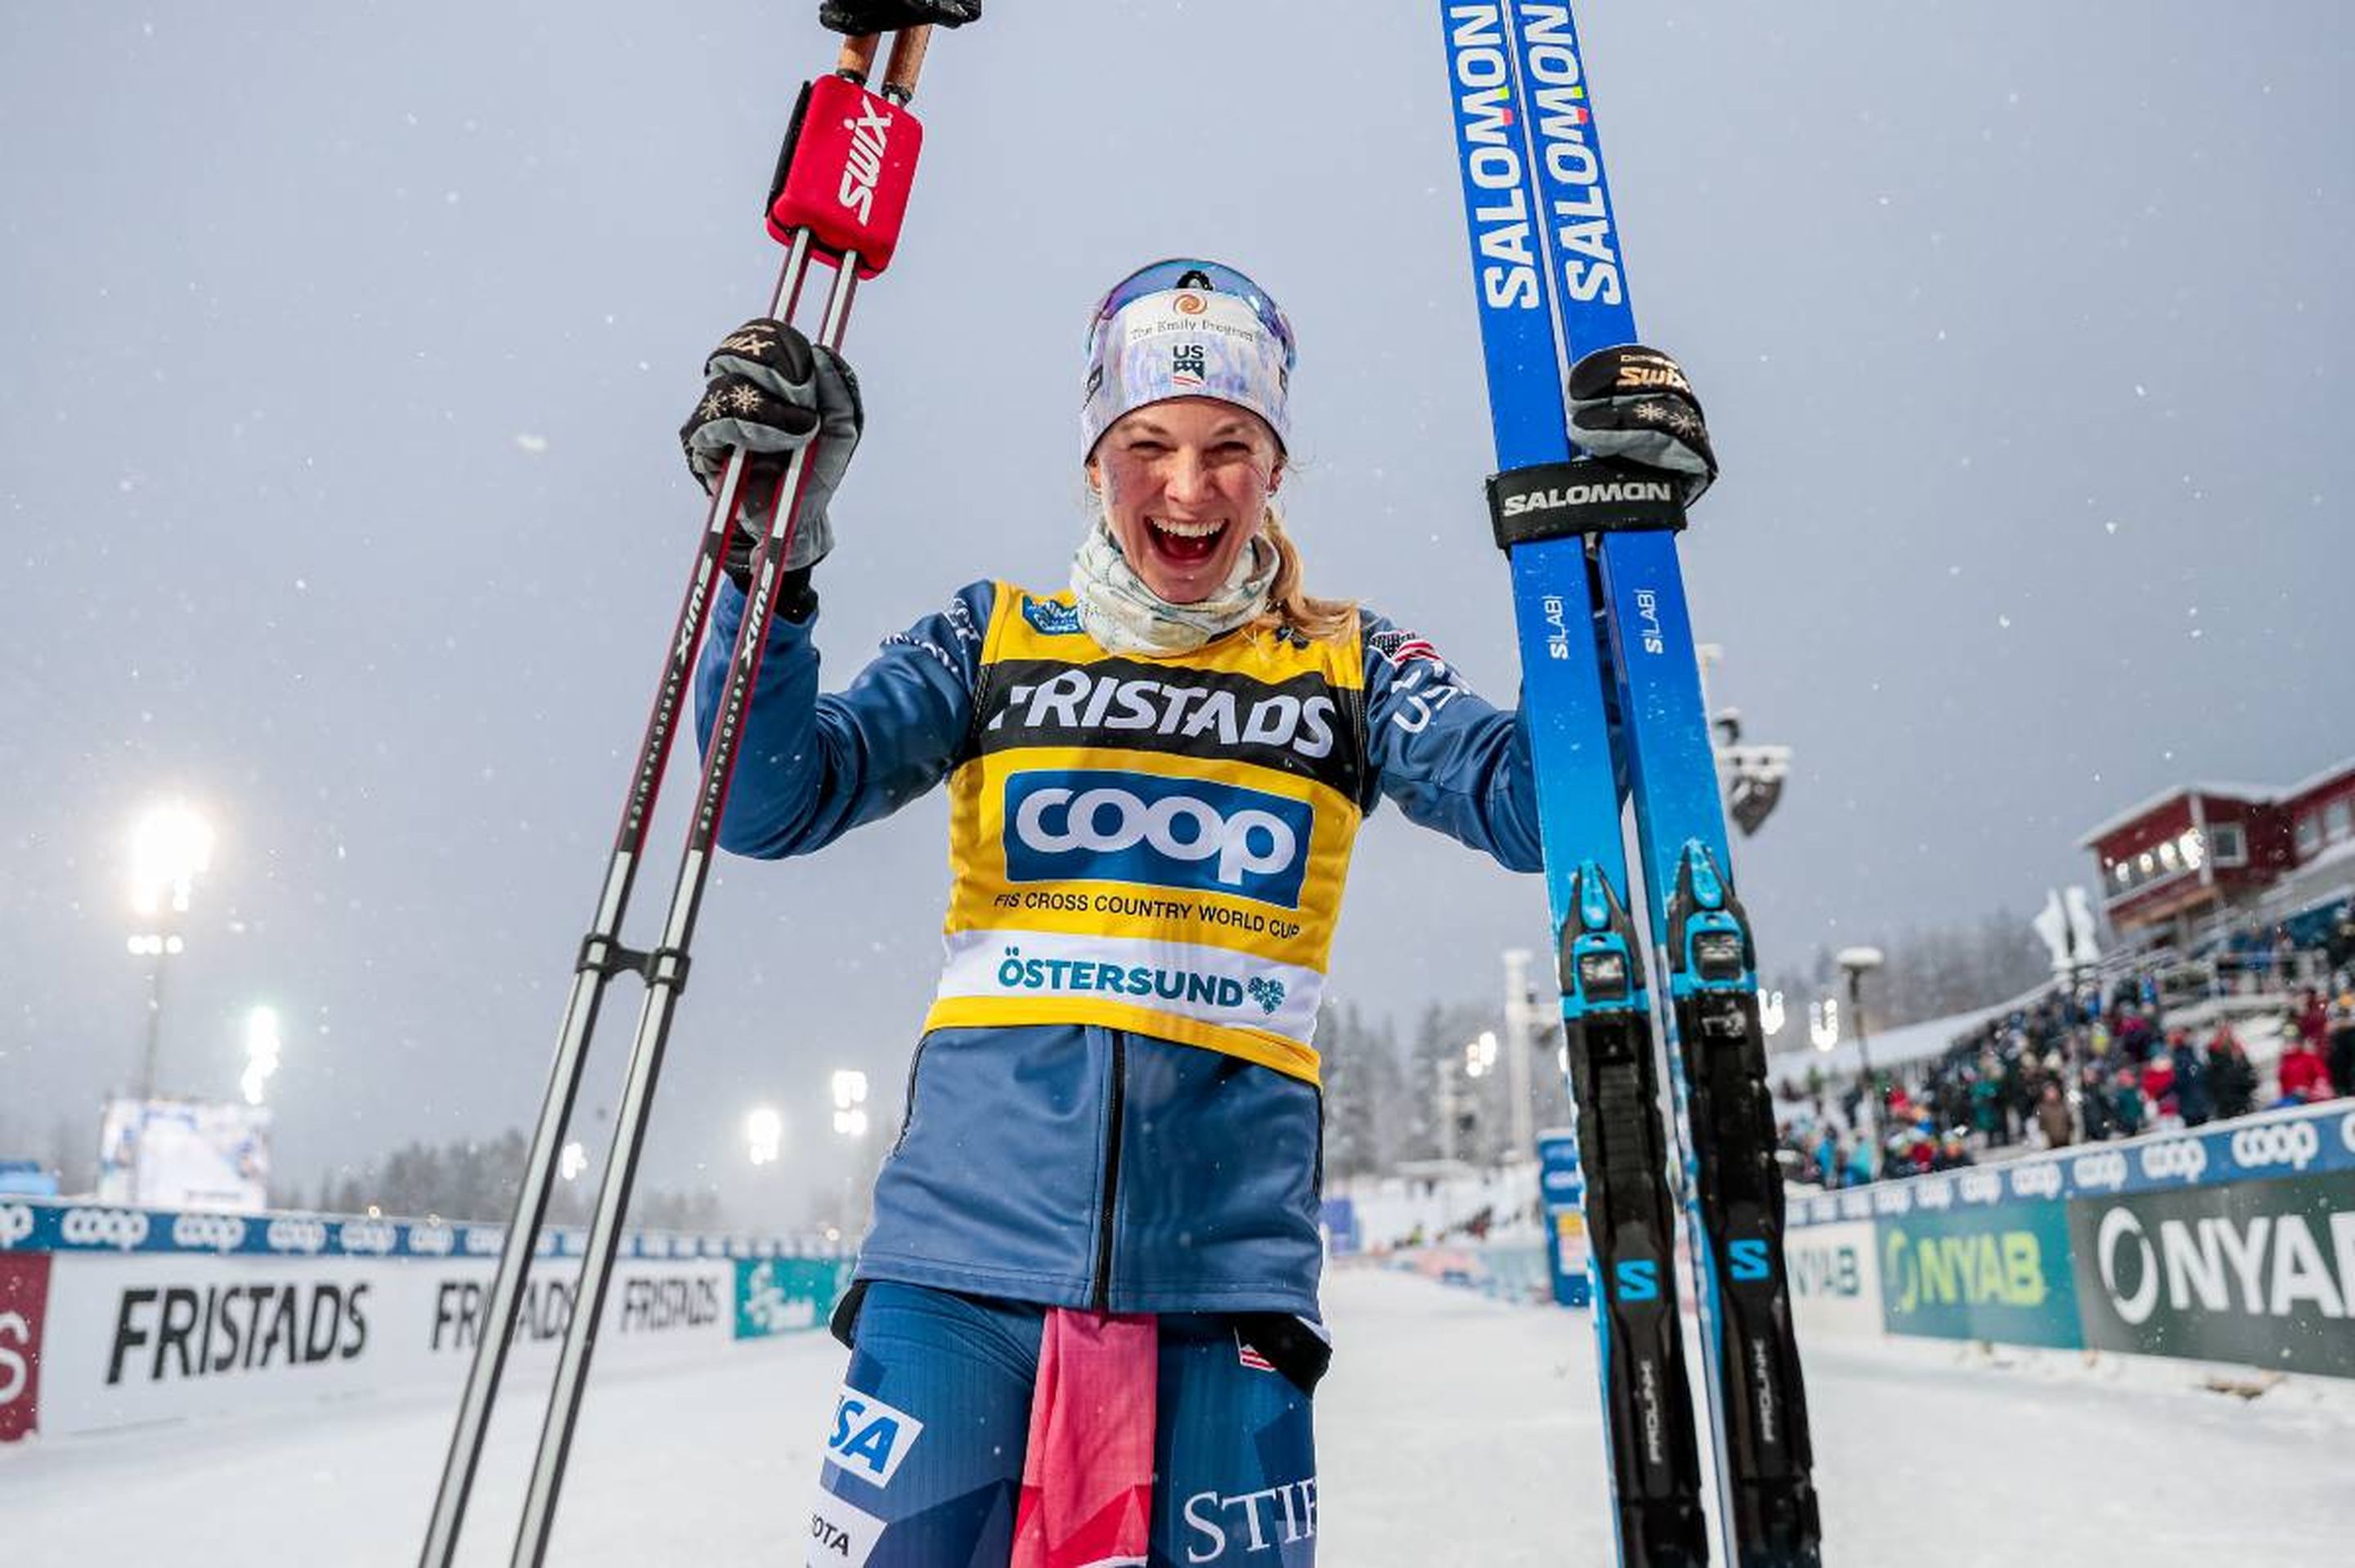 USA's Jessie Diggins after winning the women's 10km free at Oestersund, Sweden, on 10 December © NordicFocus